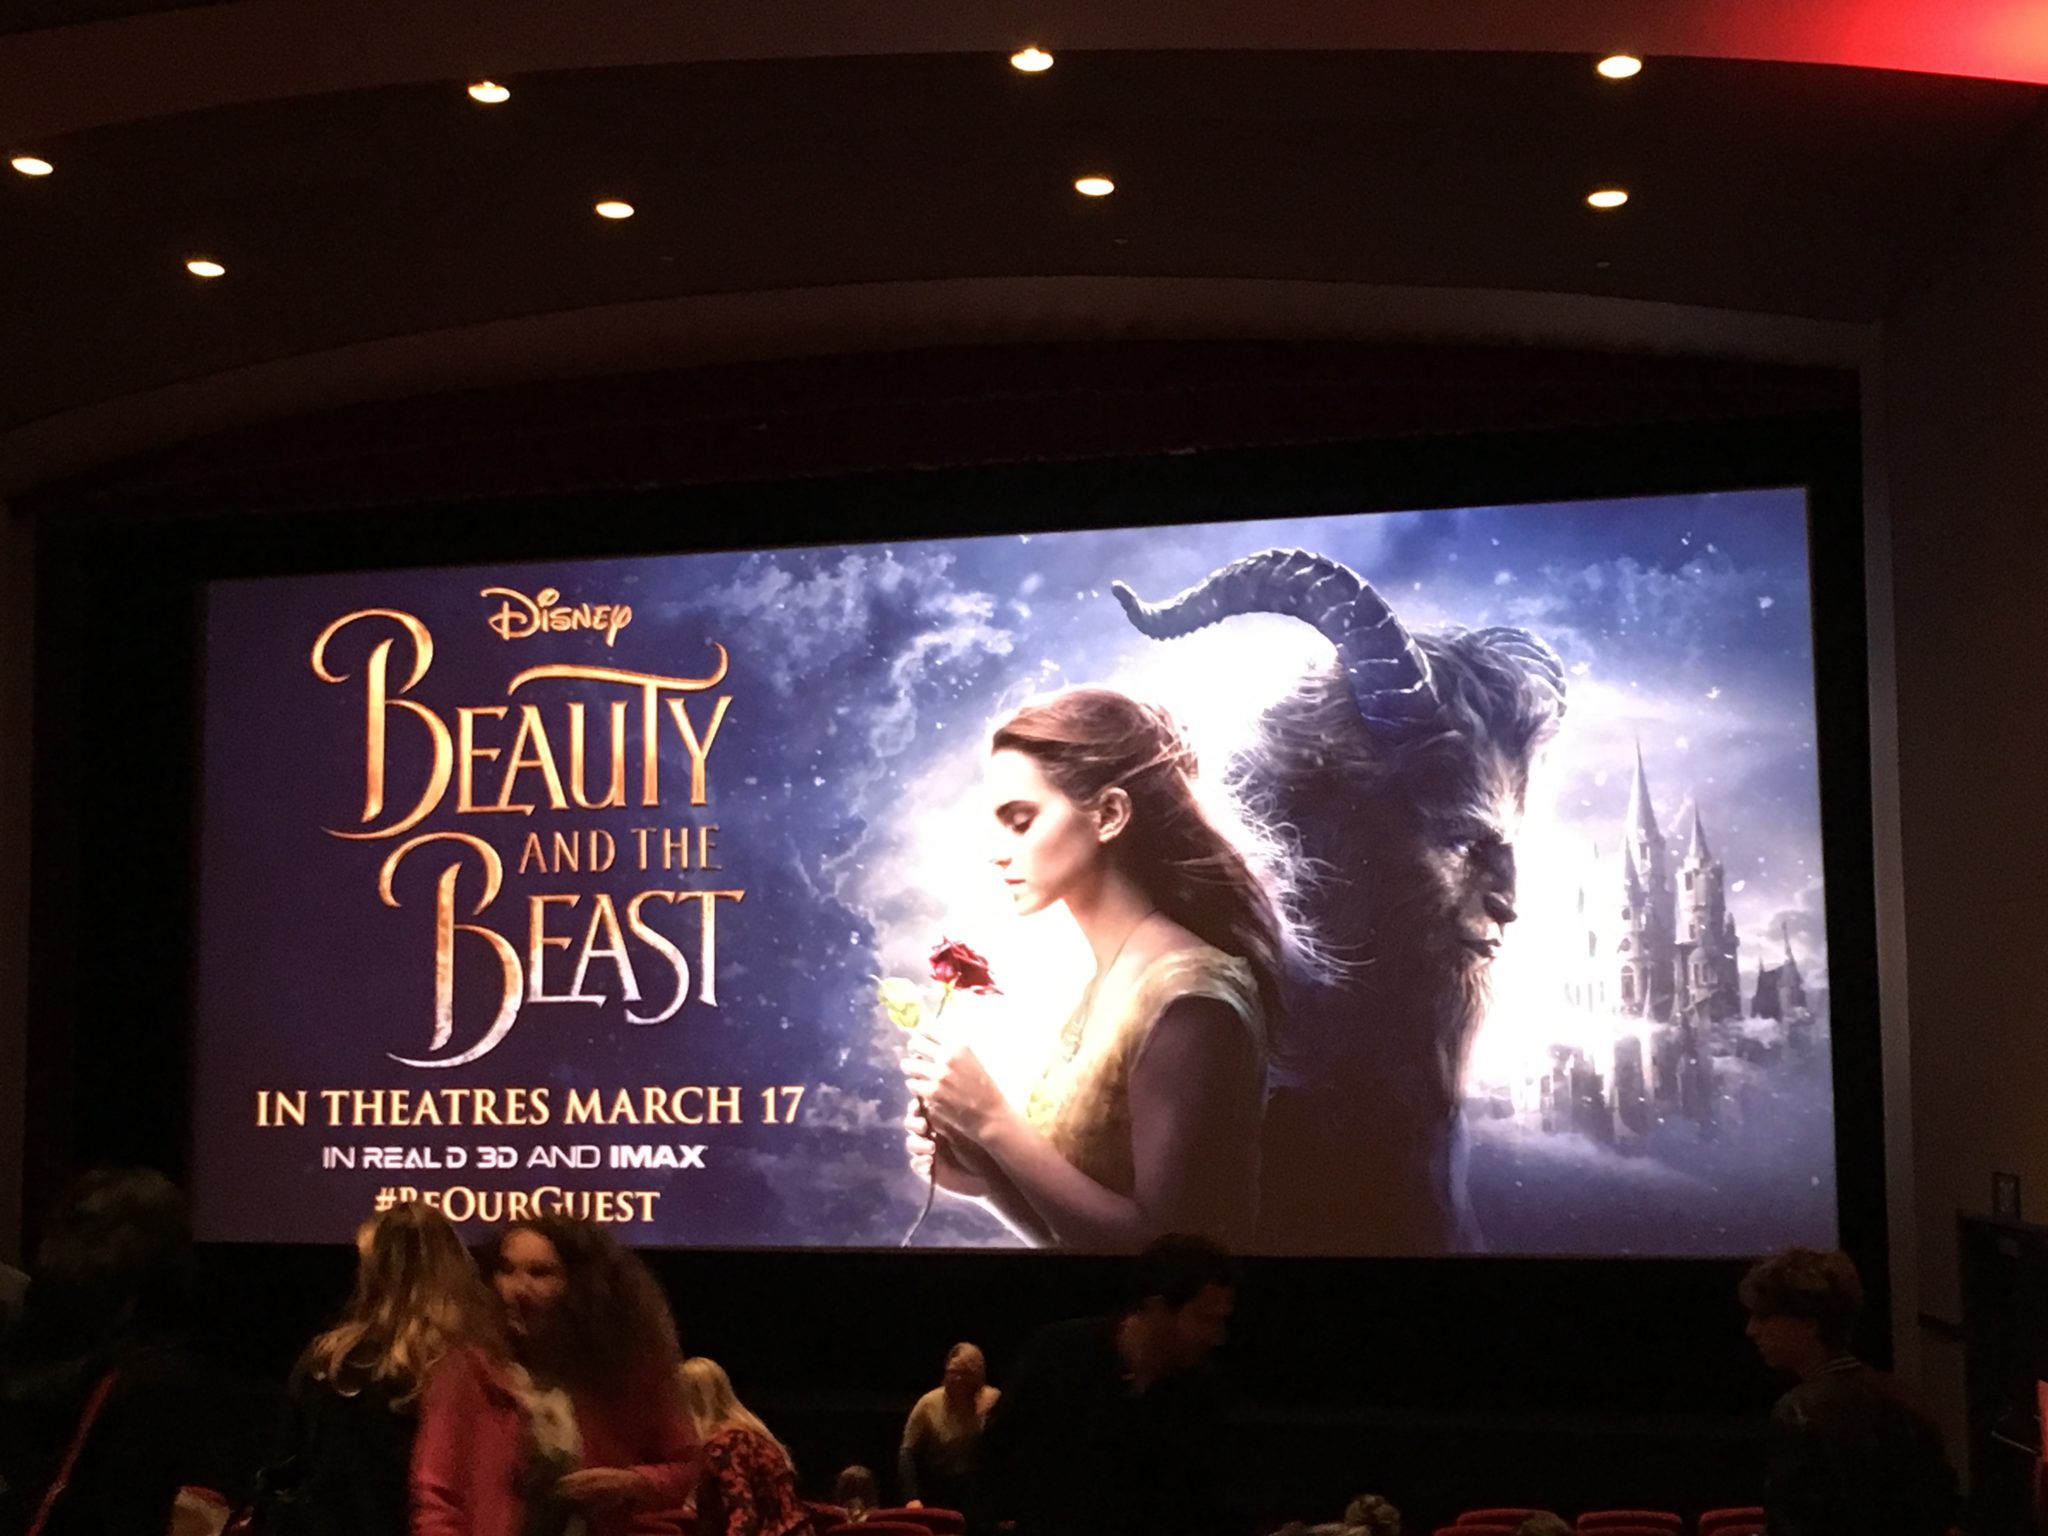 Magic and The “Beauty And The Beast” Press Conference